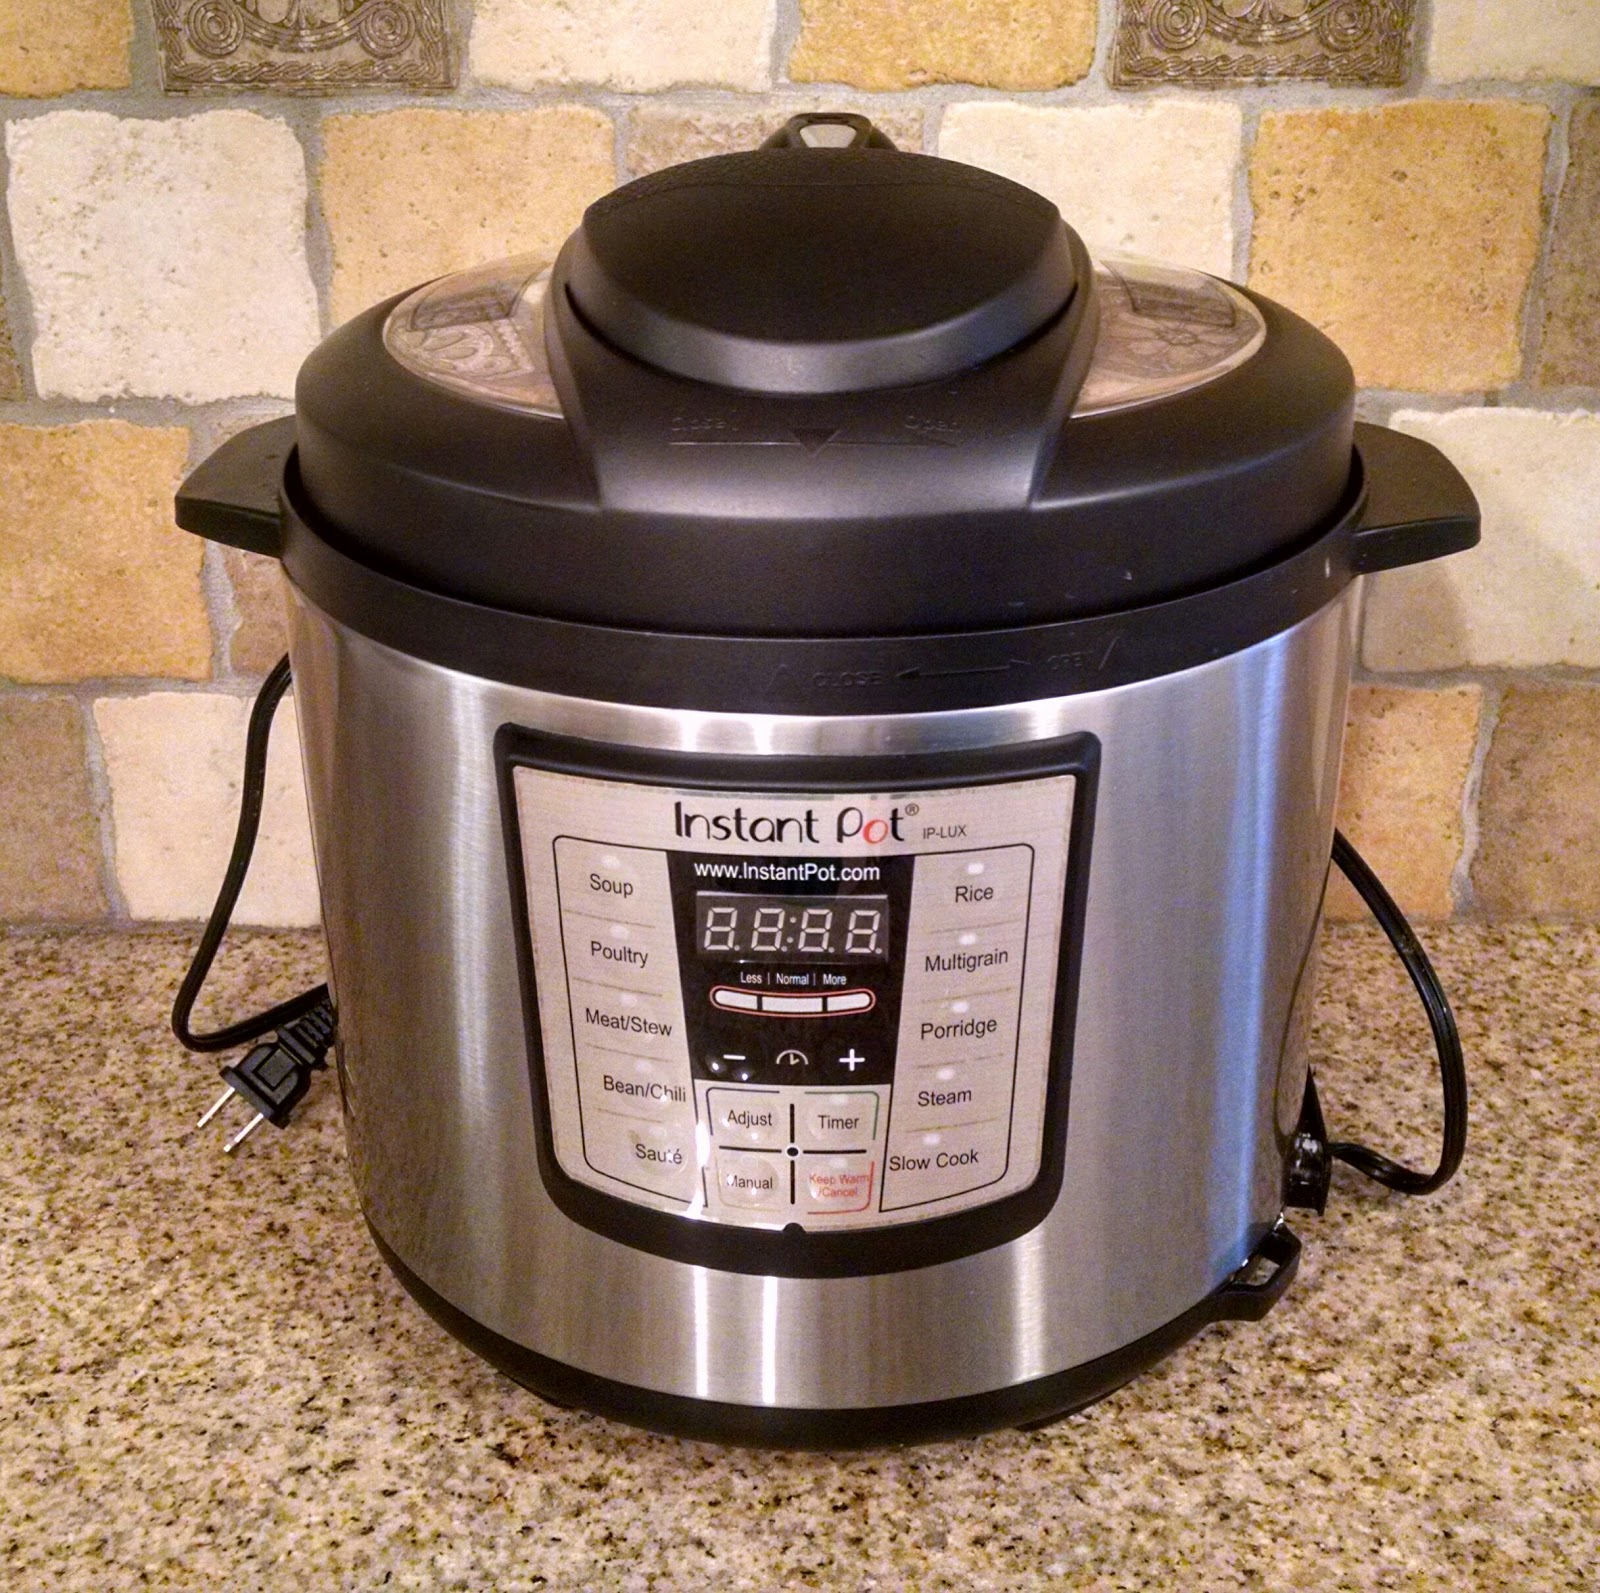 Must Run in the Family: Amazing Things You Can Do With an Instant Pot